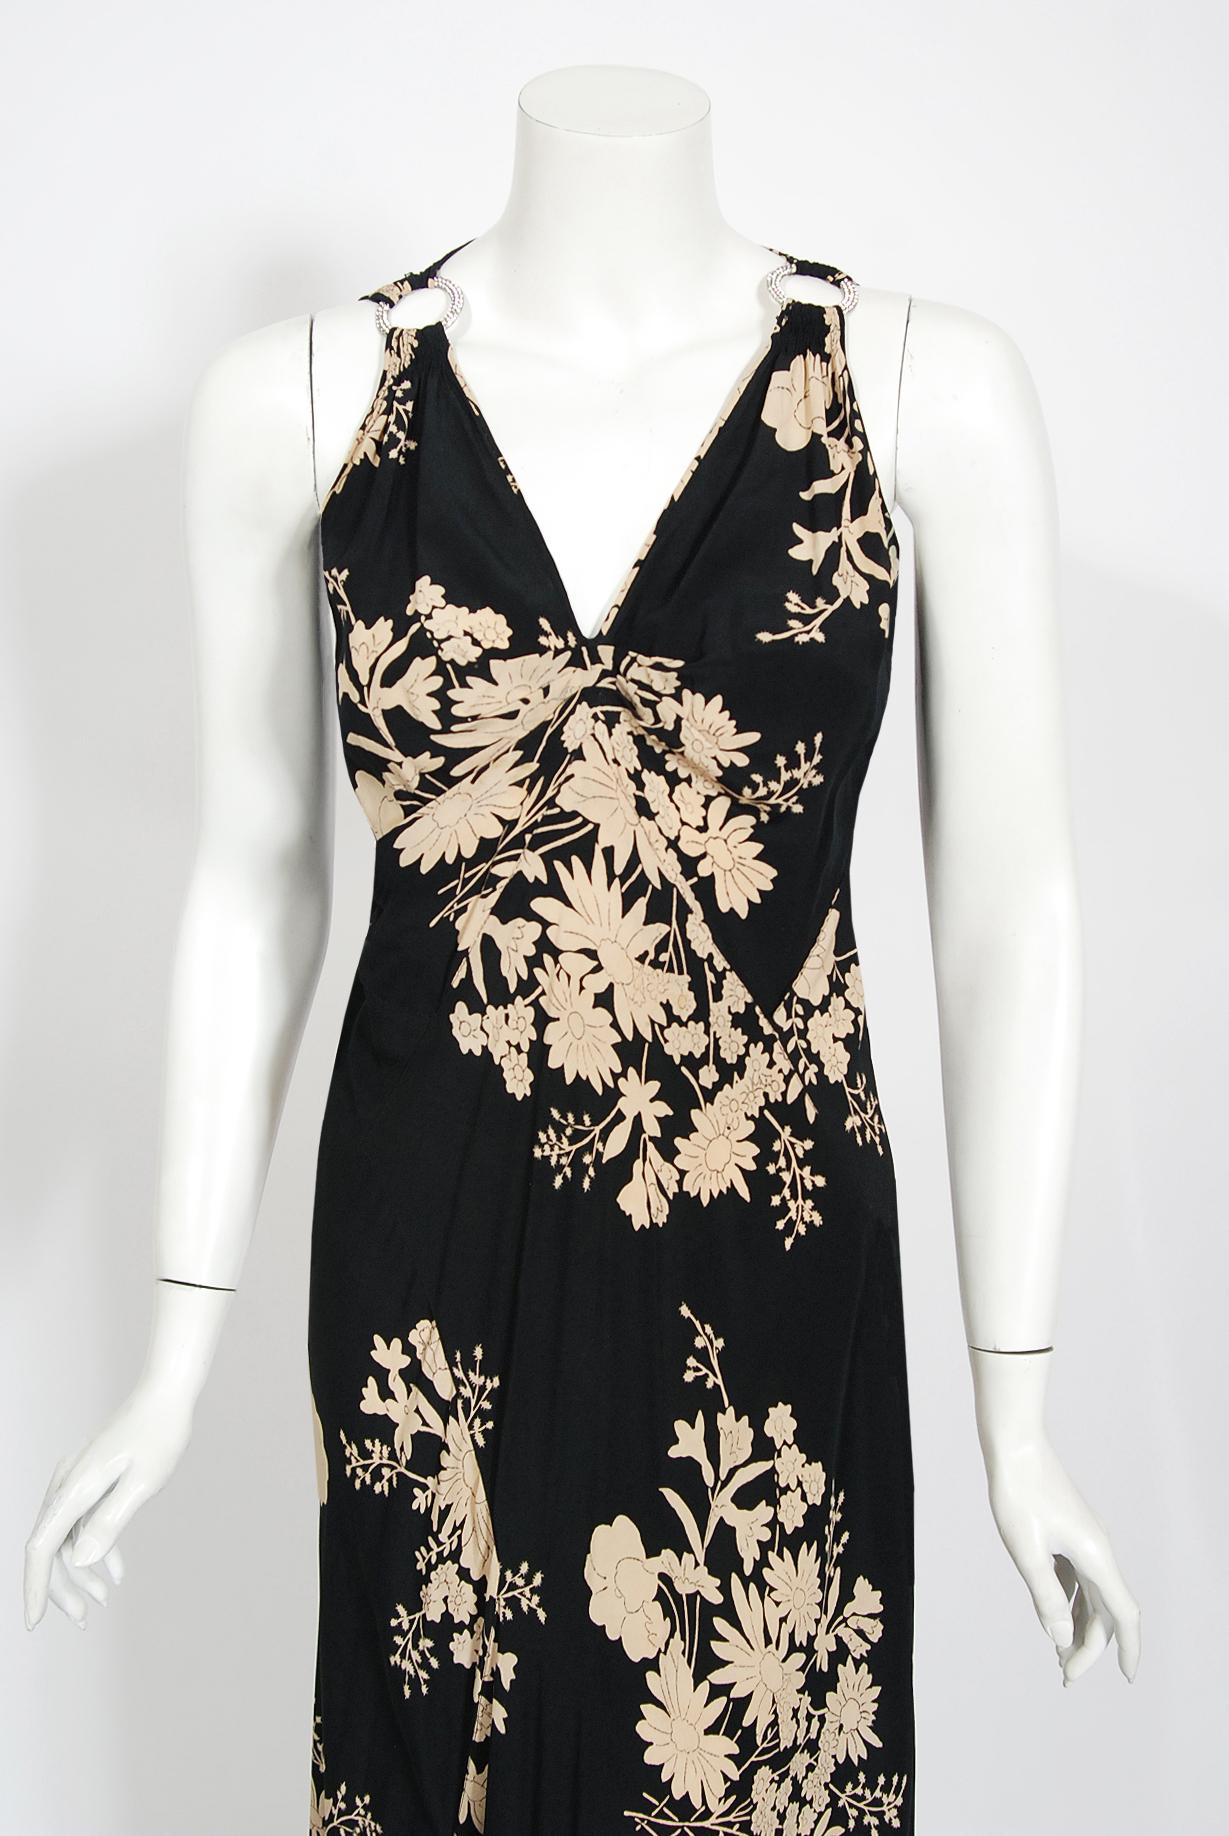 The breathtaking ivory and black floral garden print used on this 1930's hourglass silk gown has a timeless quality that I find irresistible. The impressive bodice has rhinestone paste circular accents on both sides with complex shoulder strap